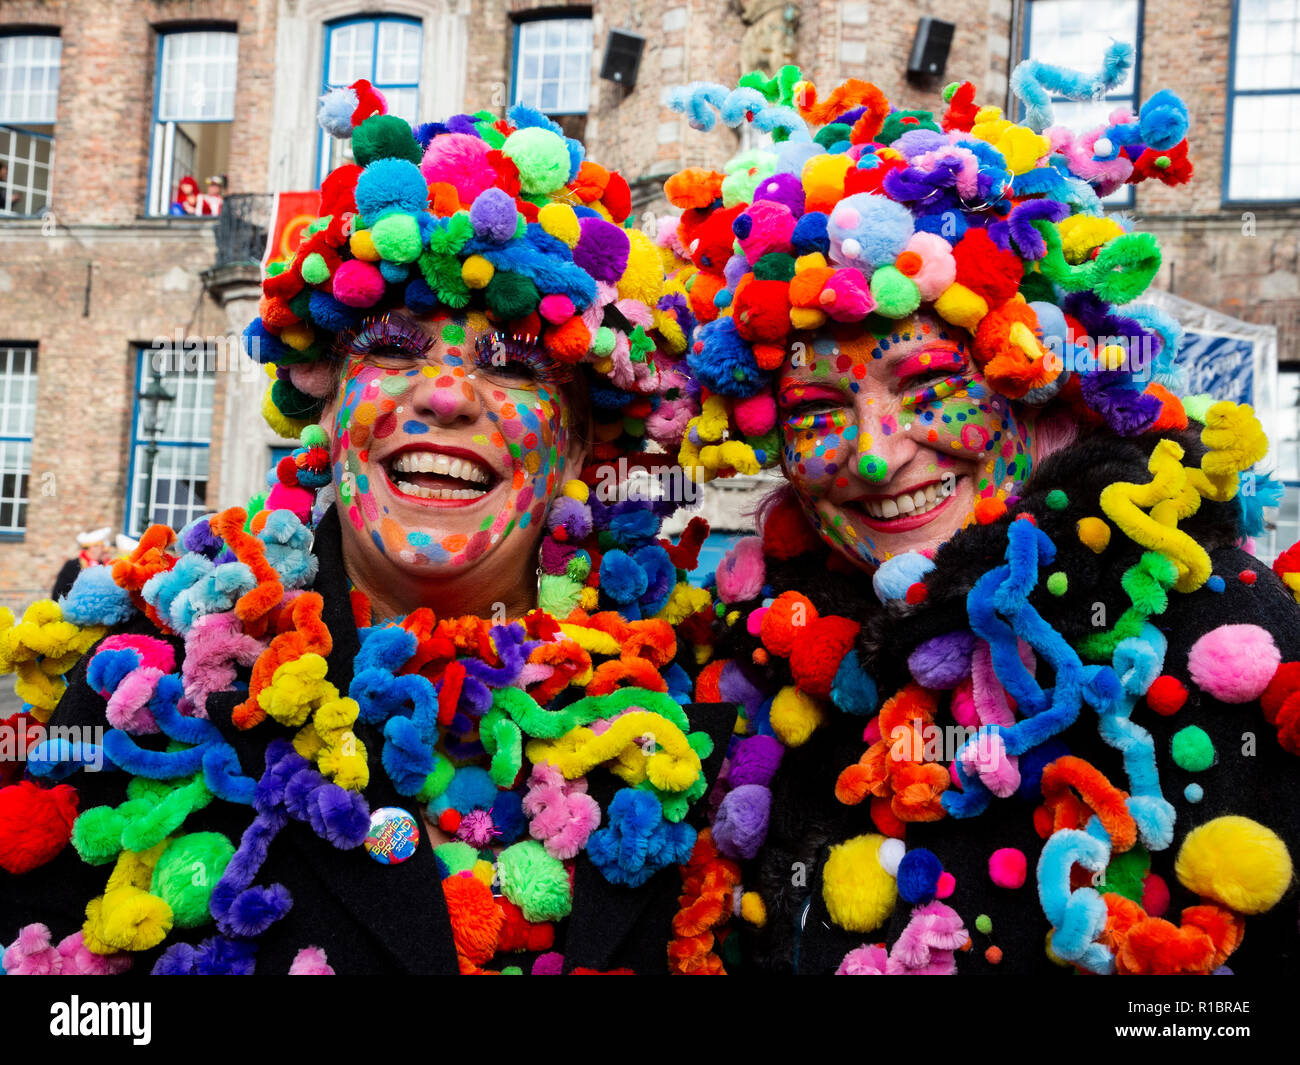 Düsseldorf, Germany. 11 November 2018. The most colourful costums on display. The German carnival season traditionally starts at 11 minutes past 11 o'clock on 11 November which today coincided with the centenary of Armistice Day, the end of World War I. Photo: 51North/Alamy Live News Stock Photo